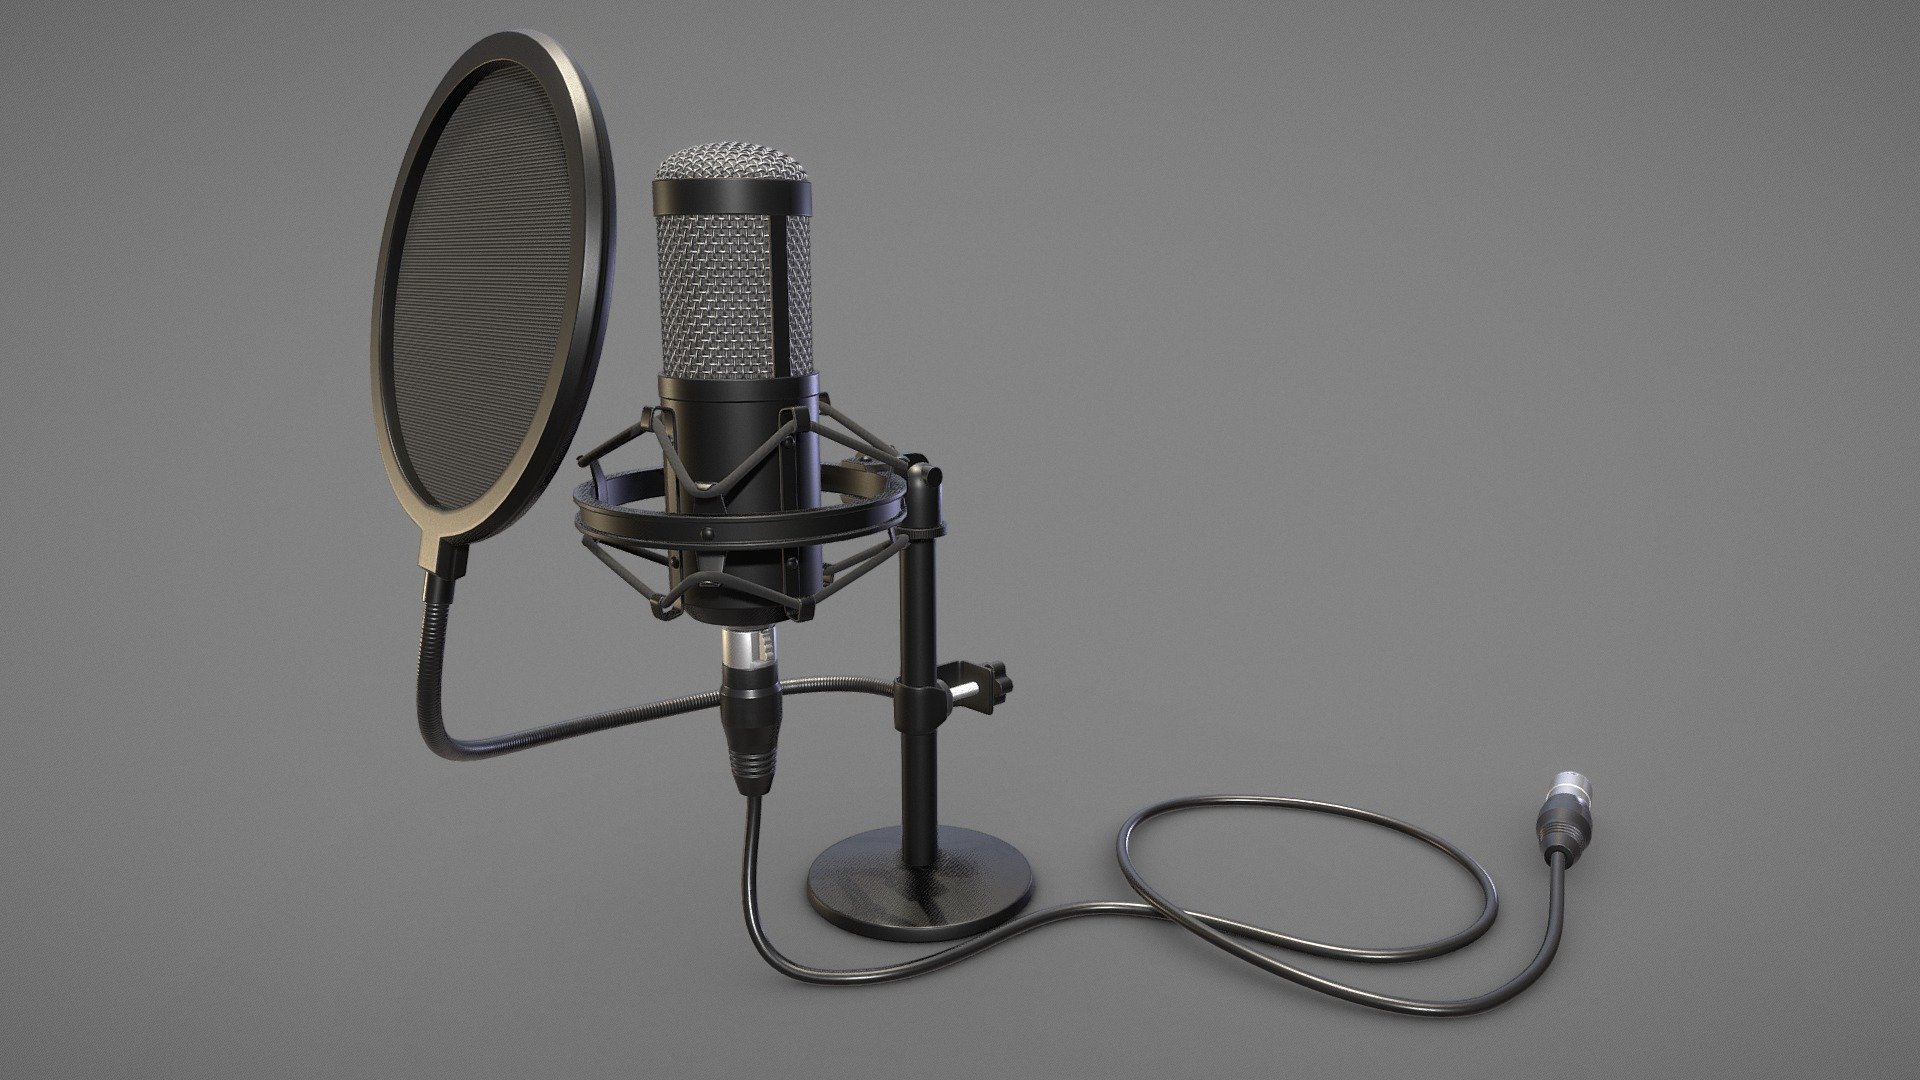 Desktop Condenser Microphone

8192x8192 textures (512x512 for corrugated wire normal map)

Textures format: 8 bit PNG

Maps: Diffuse, Metalness, Roughness, Normal (OpenGL)

Ready for subdiv

Ready for Blender 2.9, Cycles Render and EEVEE

Model parts: 15

The .blend scene has a &ldquo;Mic_curve_wires